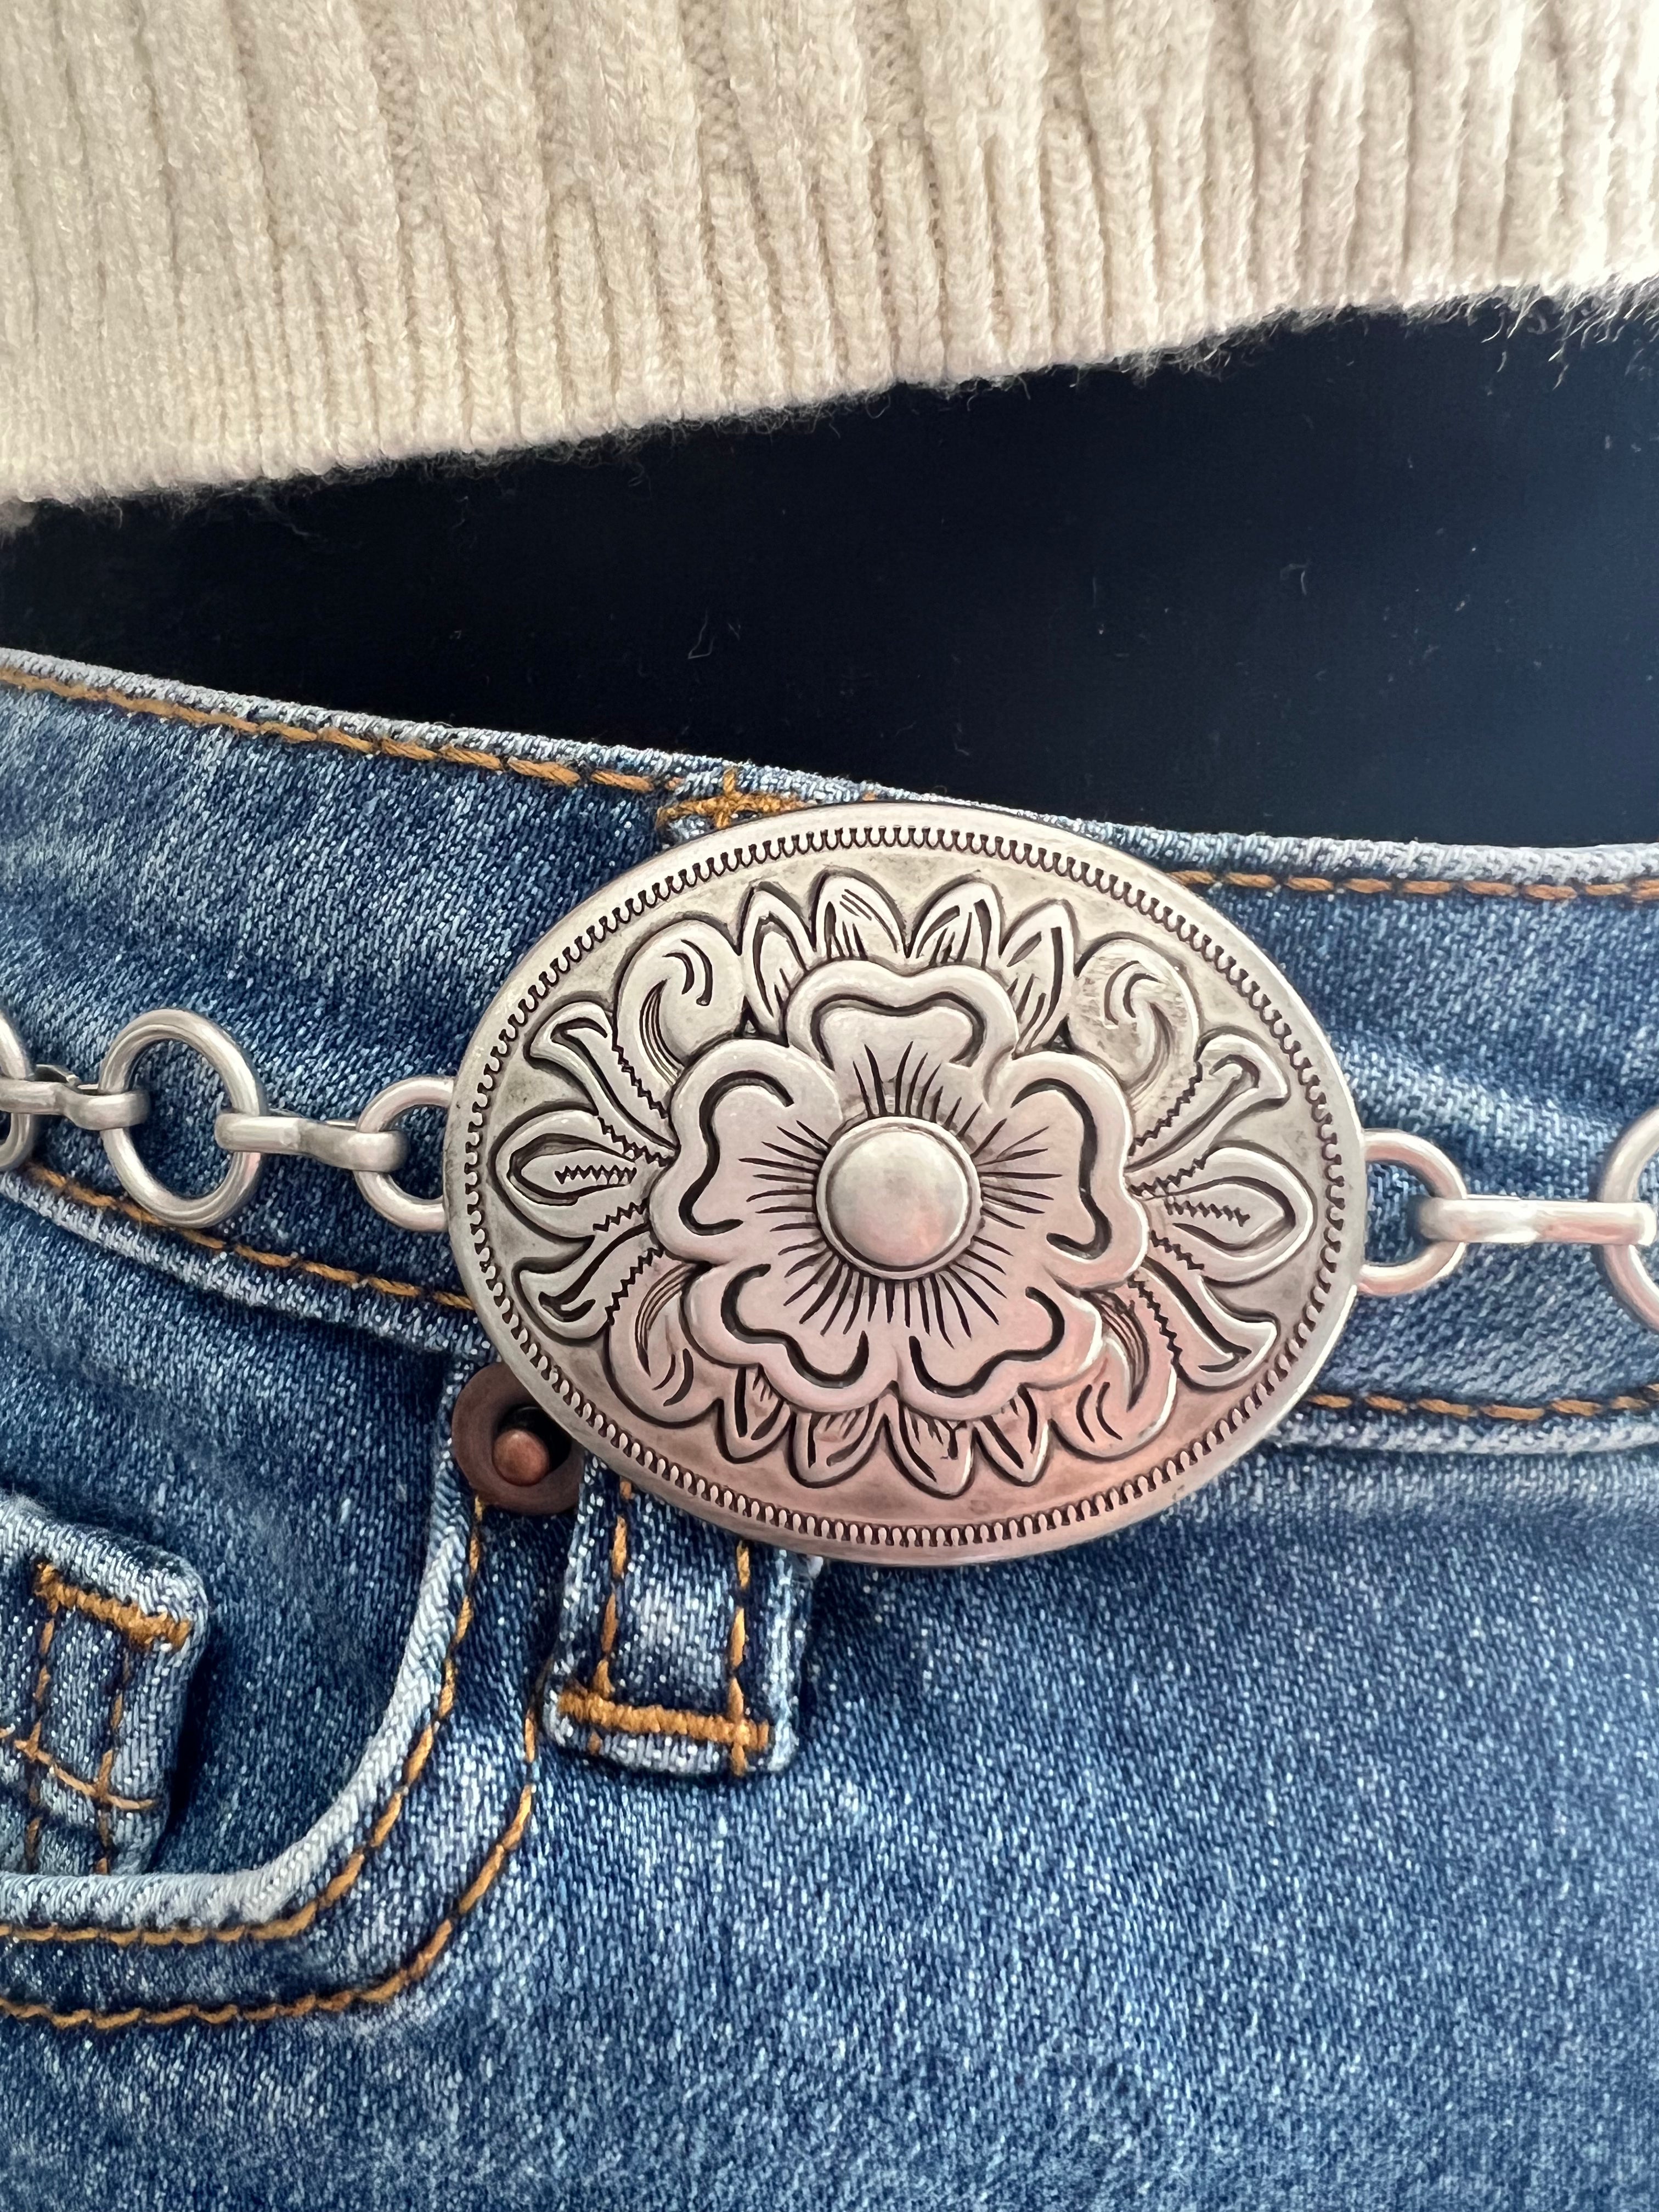 Silver Plated Flower Concho Belt